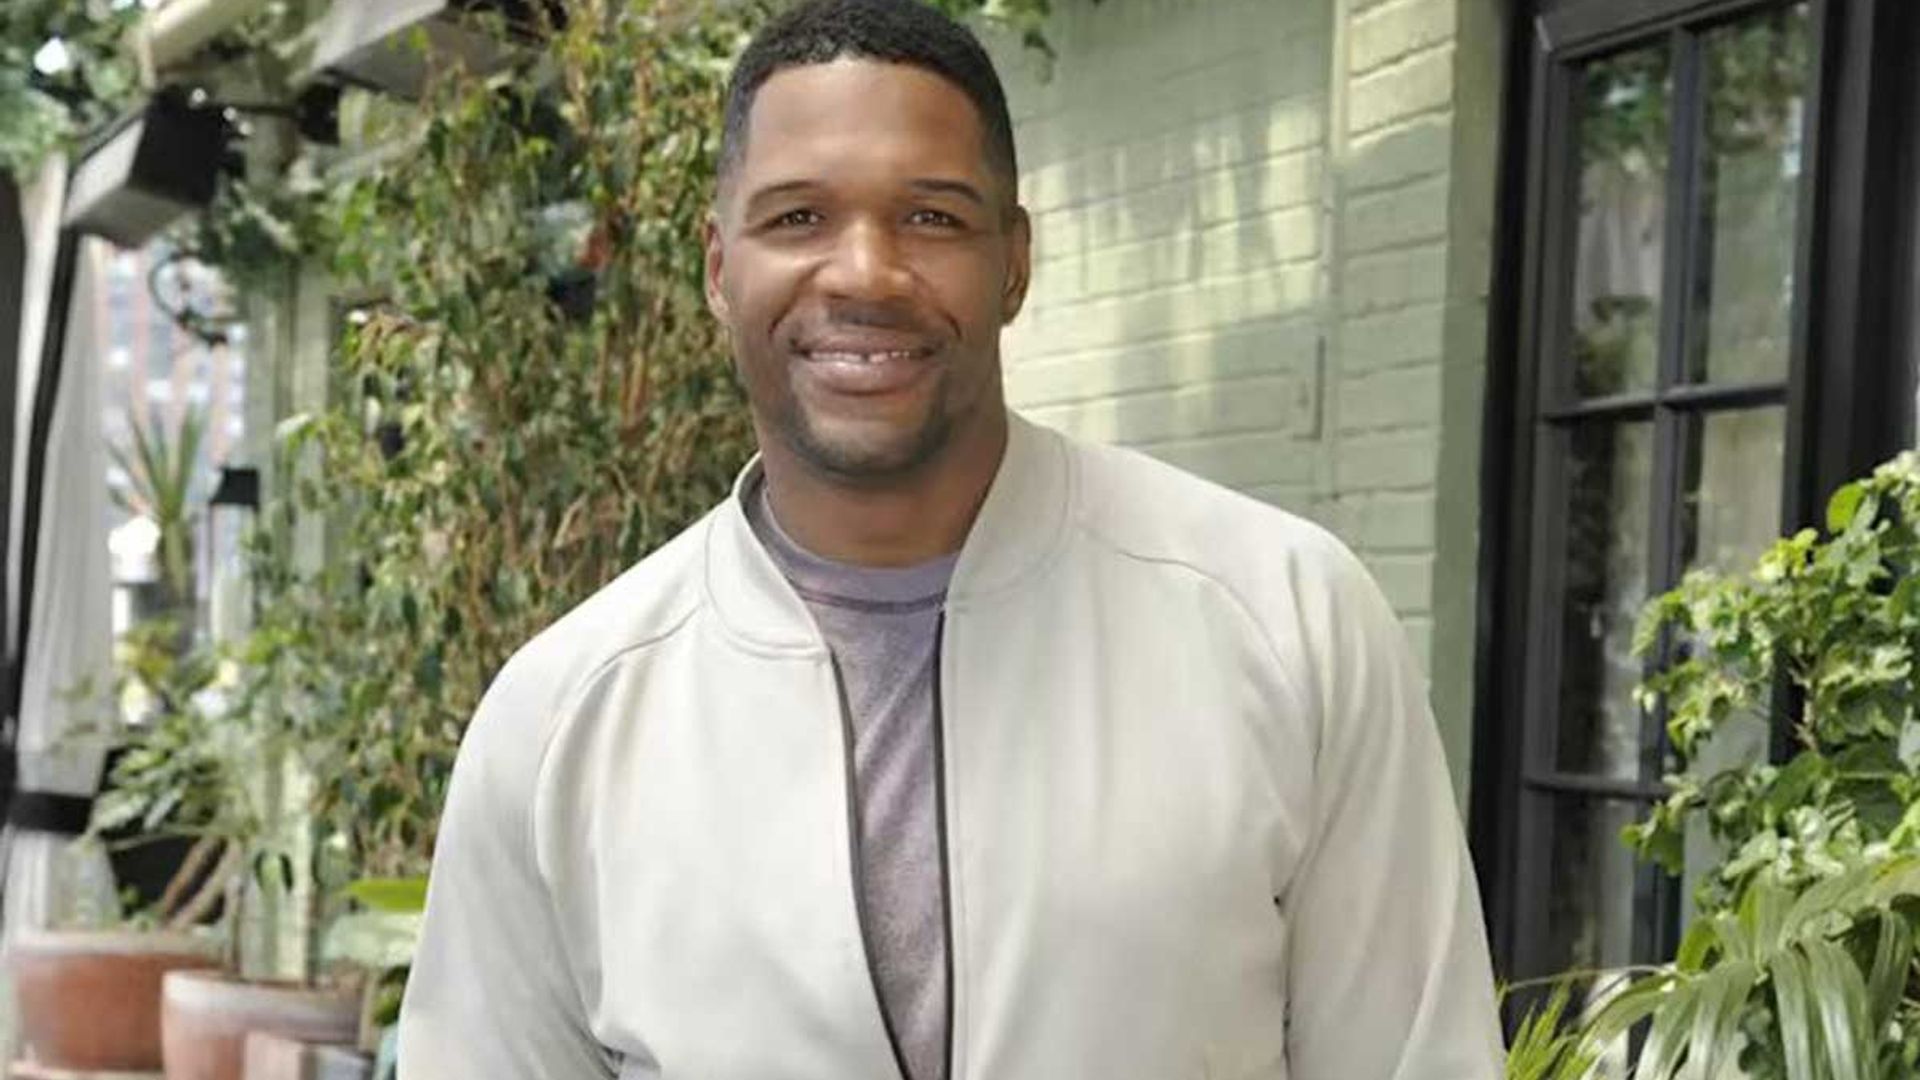 GMA’s Michael Strahan shares rare glimpse inside huge garden in family home in NYC